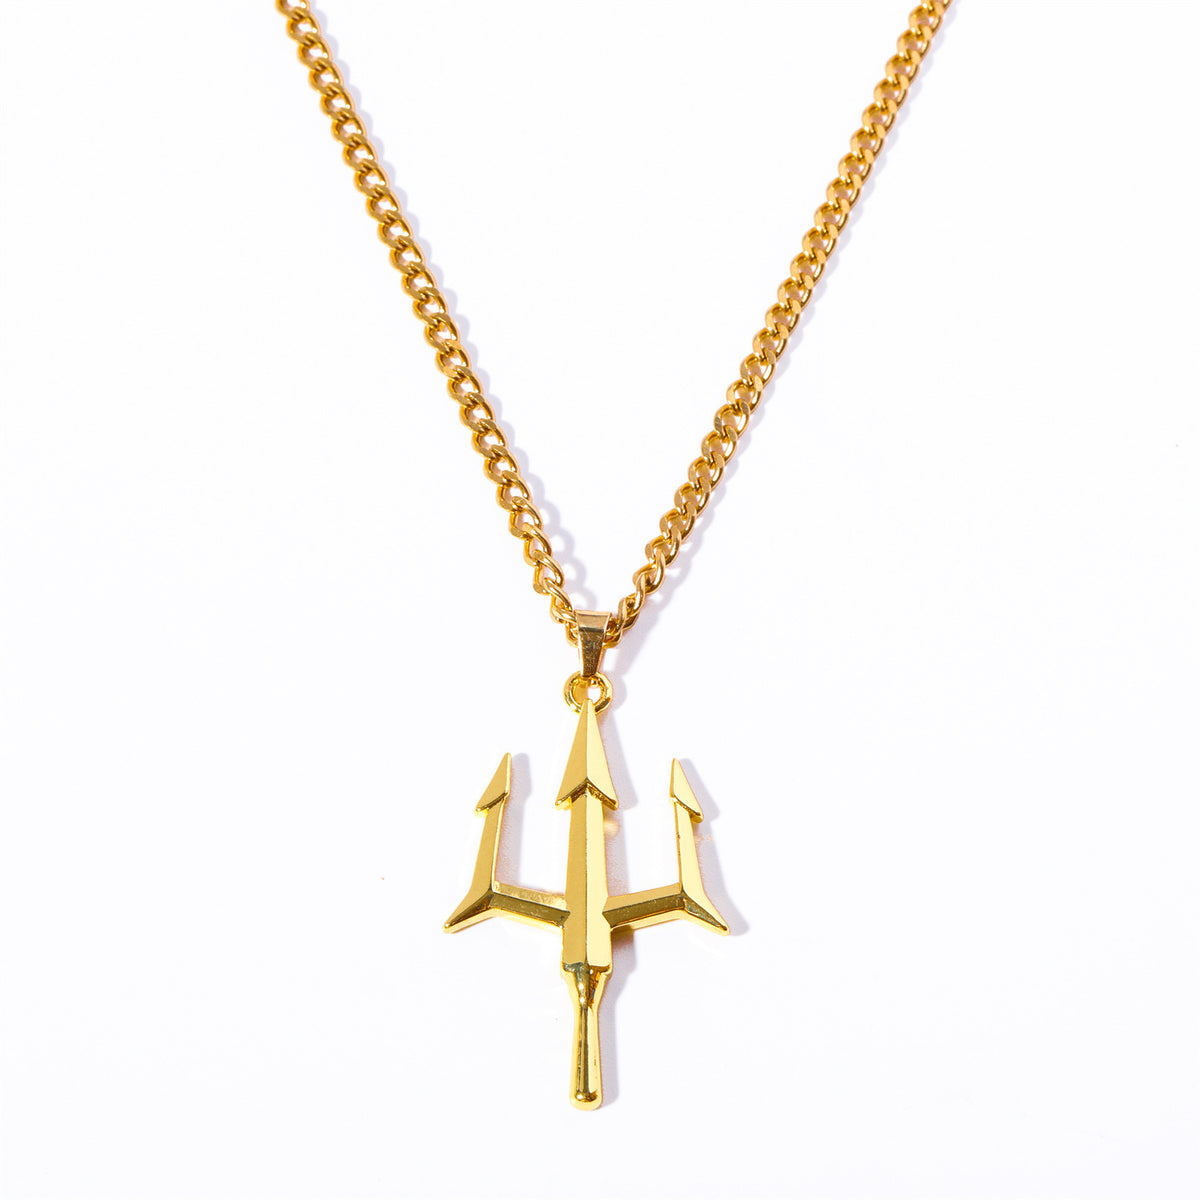 Collier Trident Homme A5023